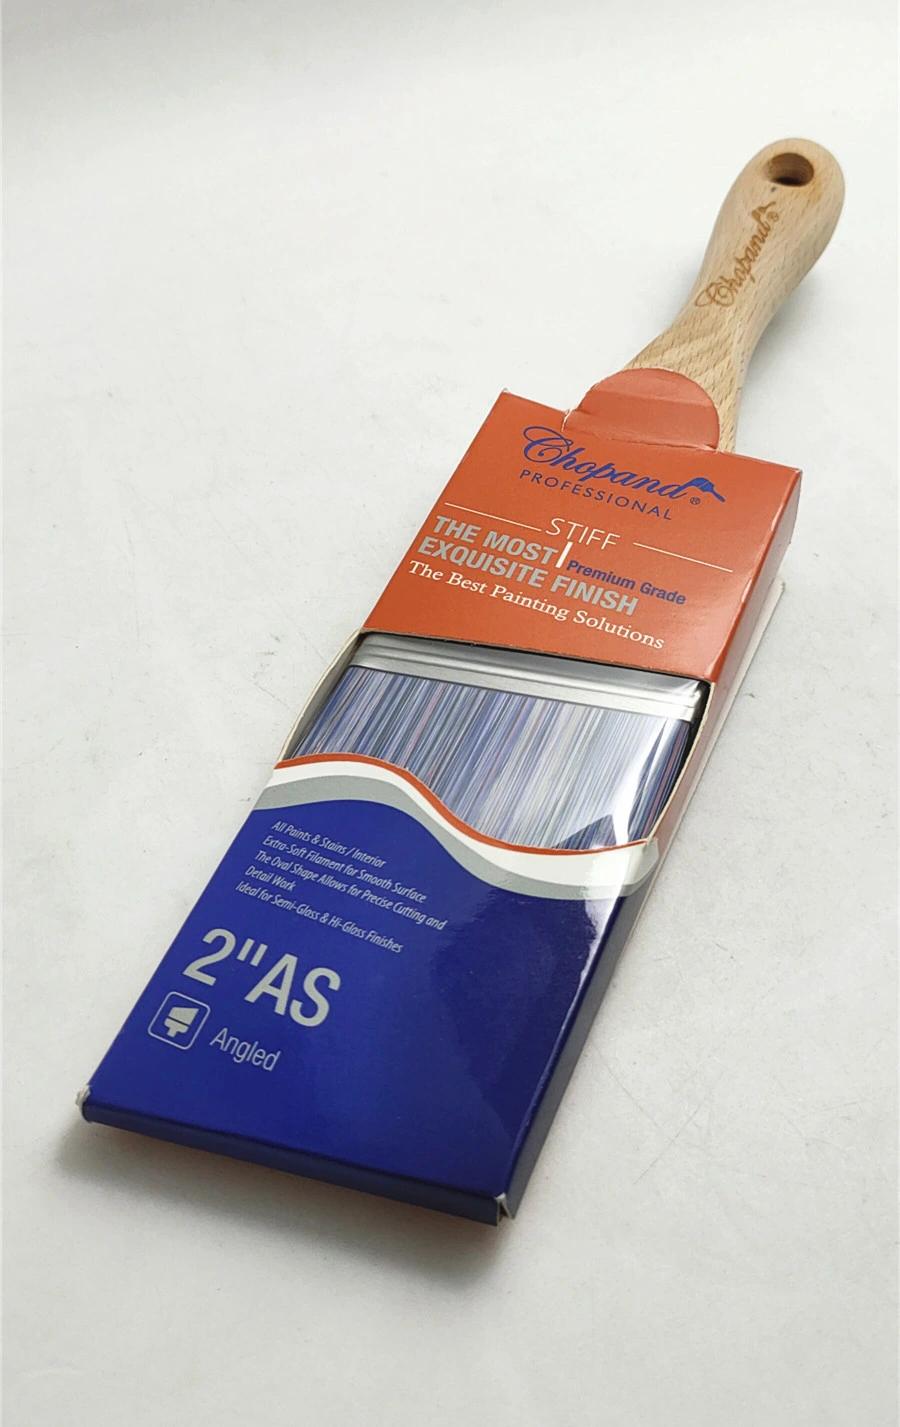 High Quality Environmental Natural Wooden Handle Paint Brush